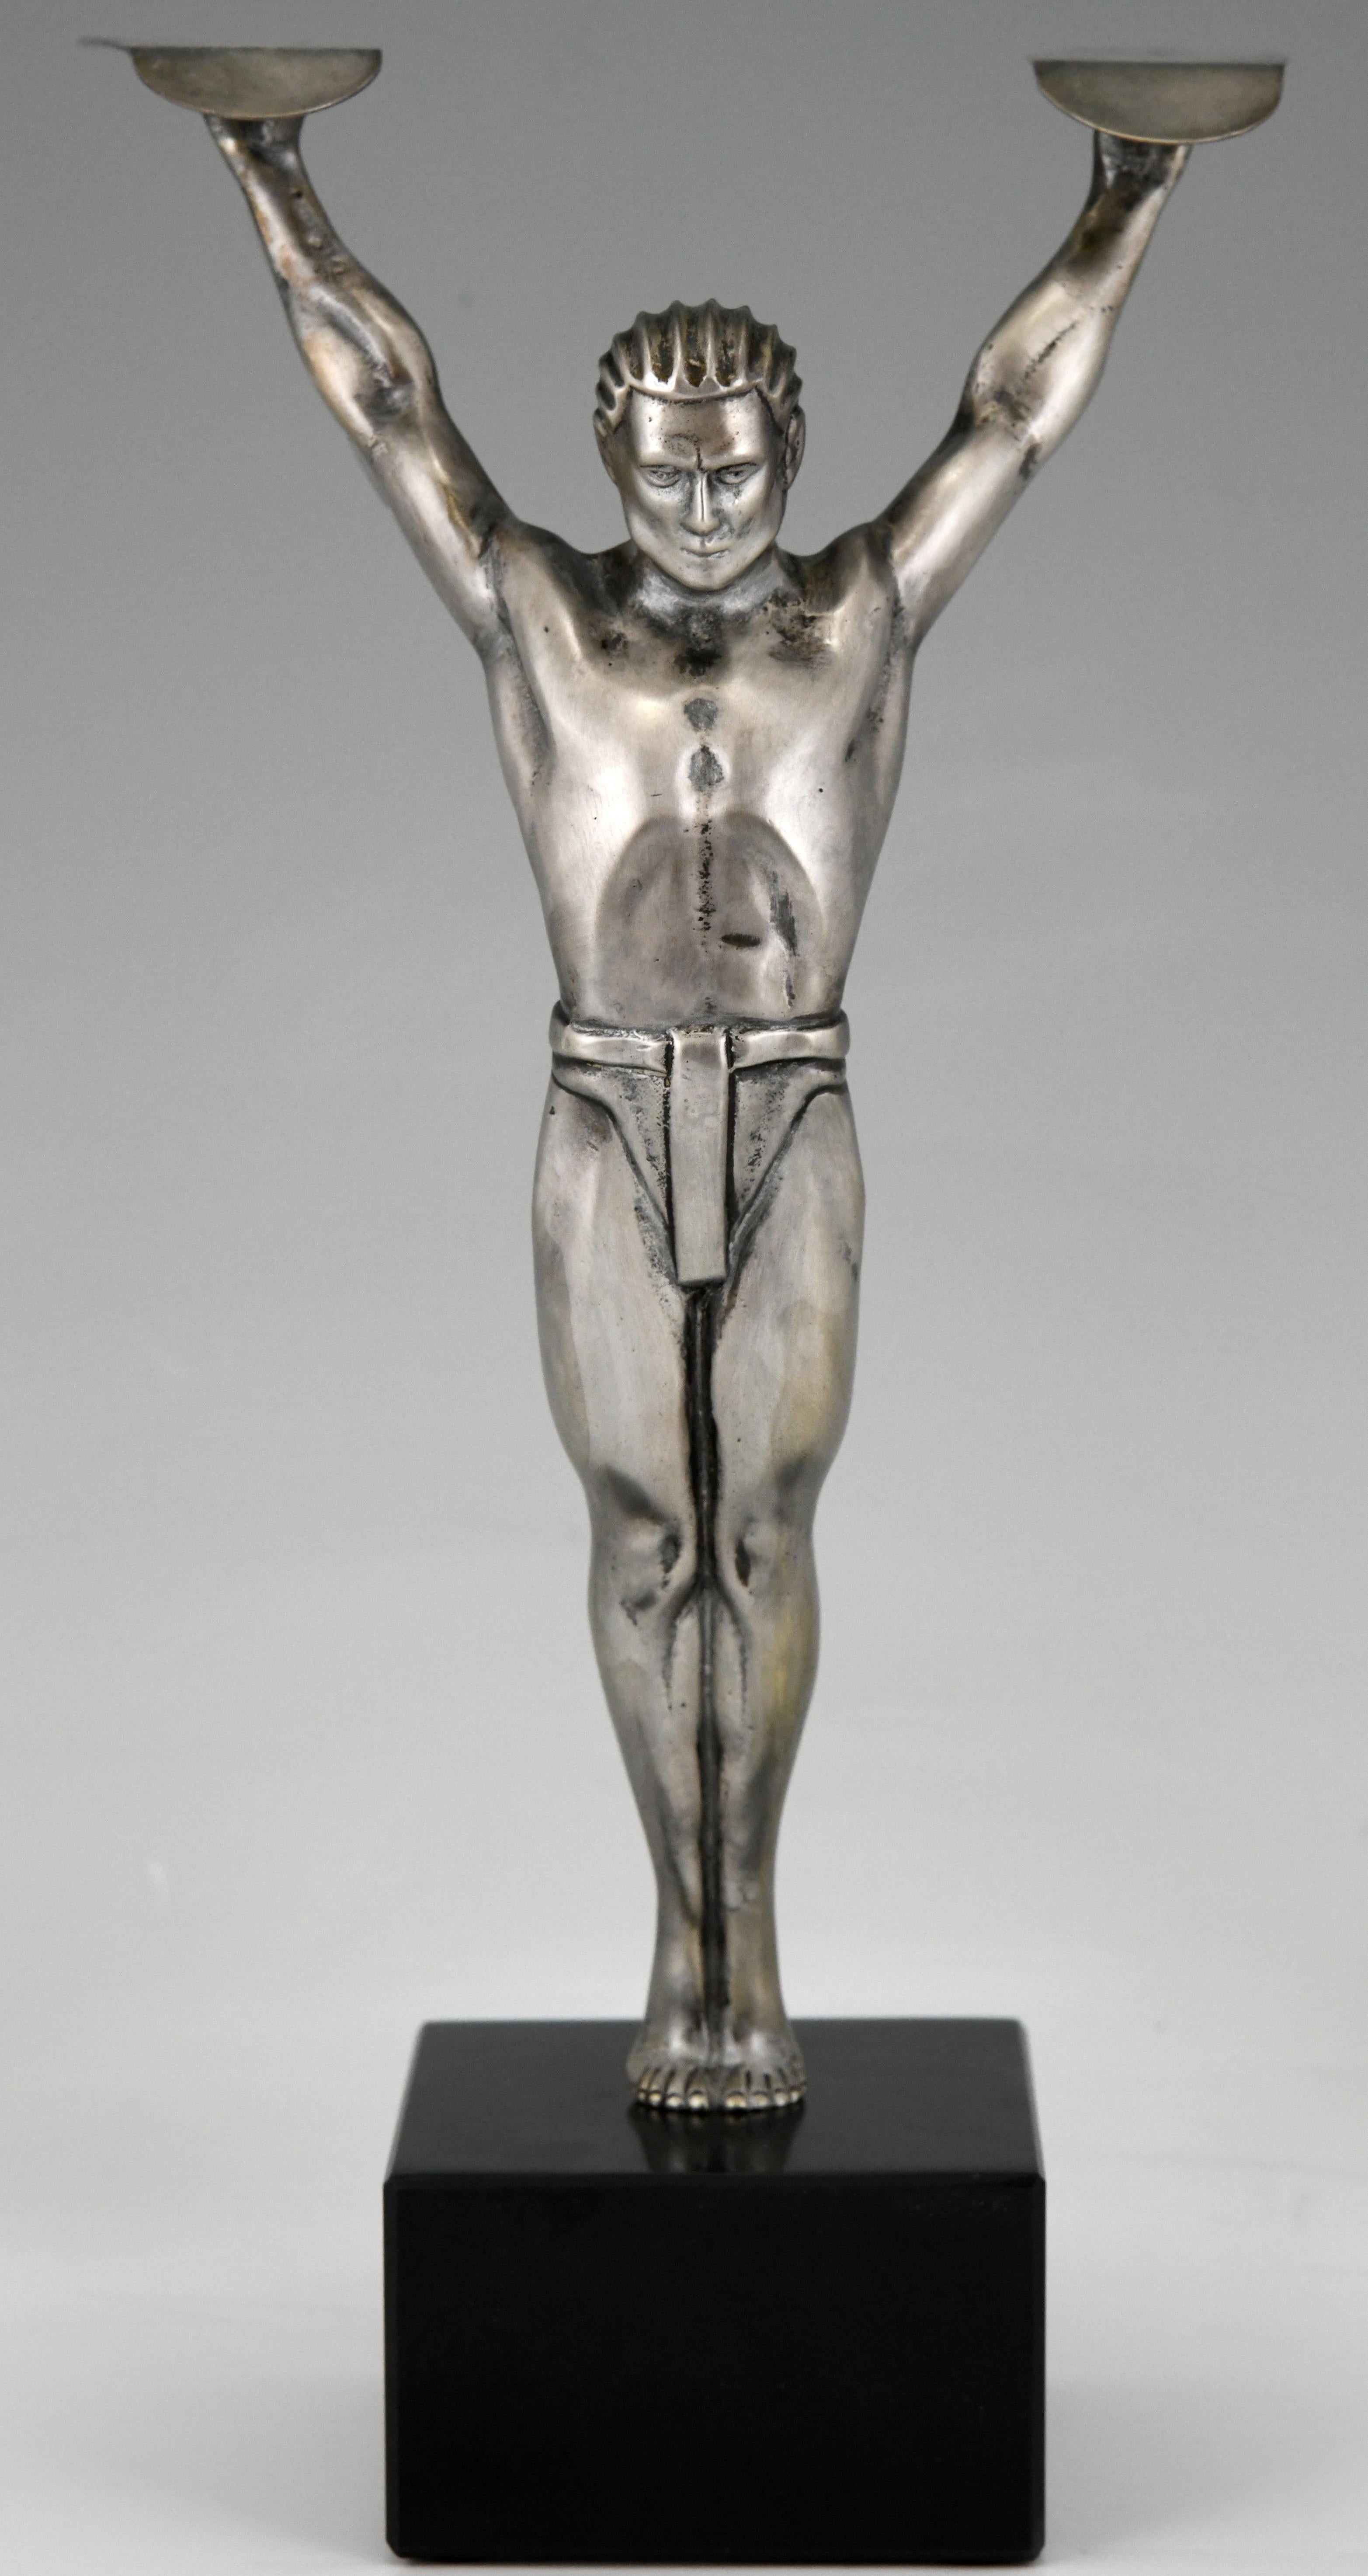 Icarus, stylish Art Deco bronze sculpture of a winged athlete in the style of Otto Schmidt Hofer Germany, circa 1930.
The bronze figure has a silver patina and is mounted on a black marble base.